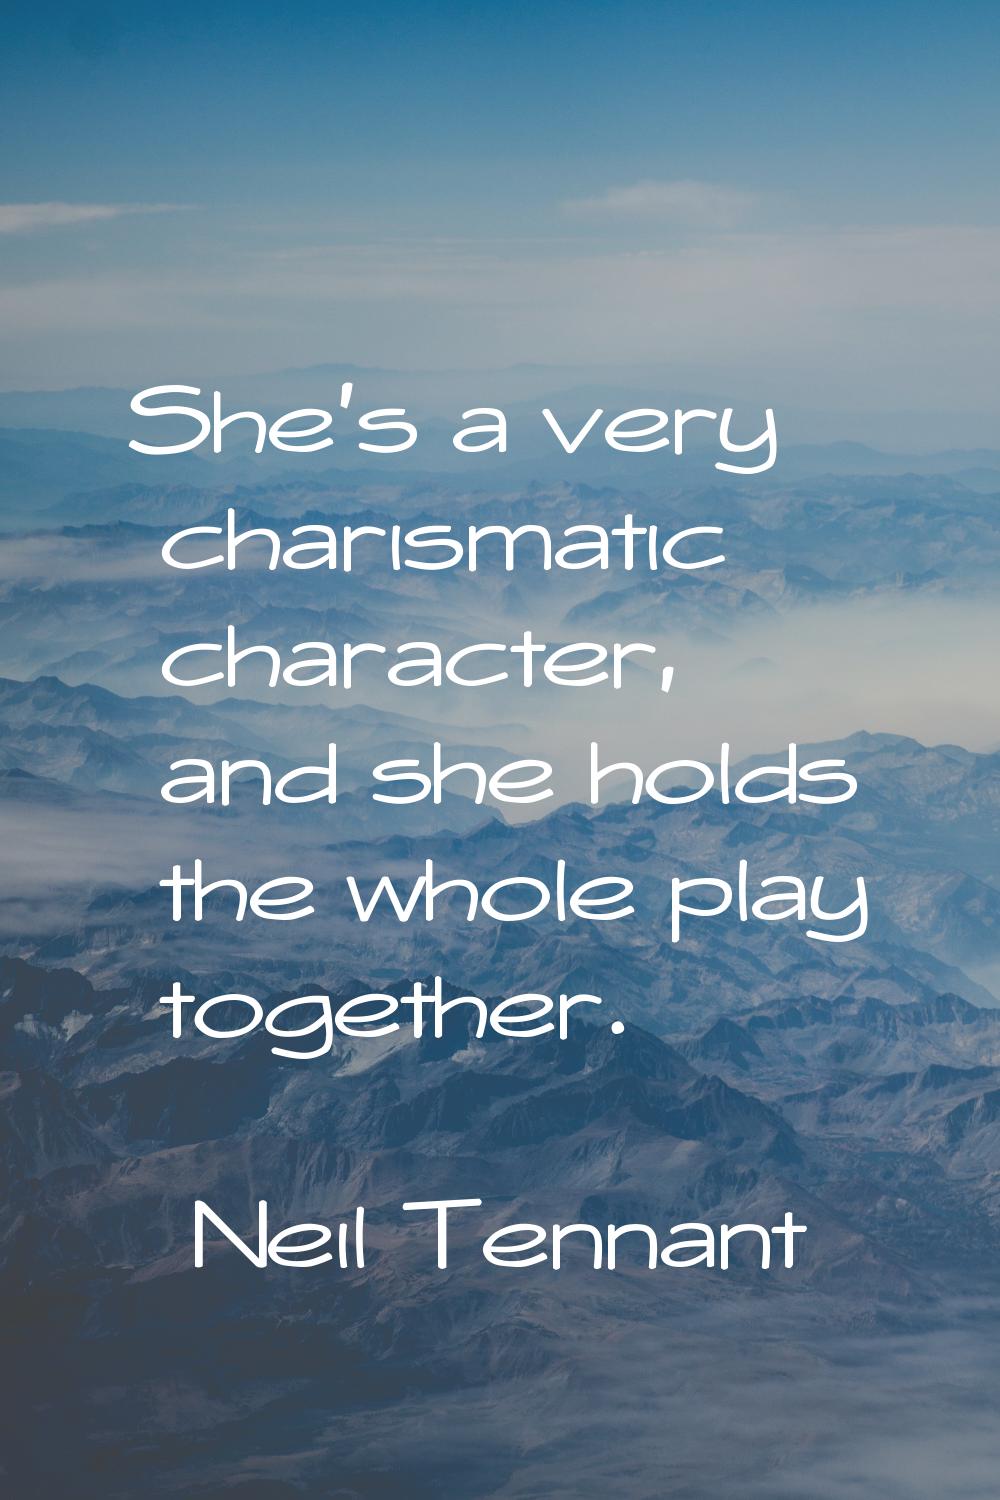 She's a very charismatic character, and she holds the whole play together.